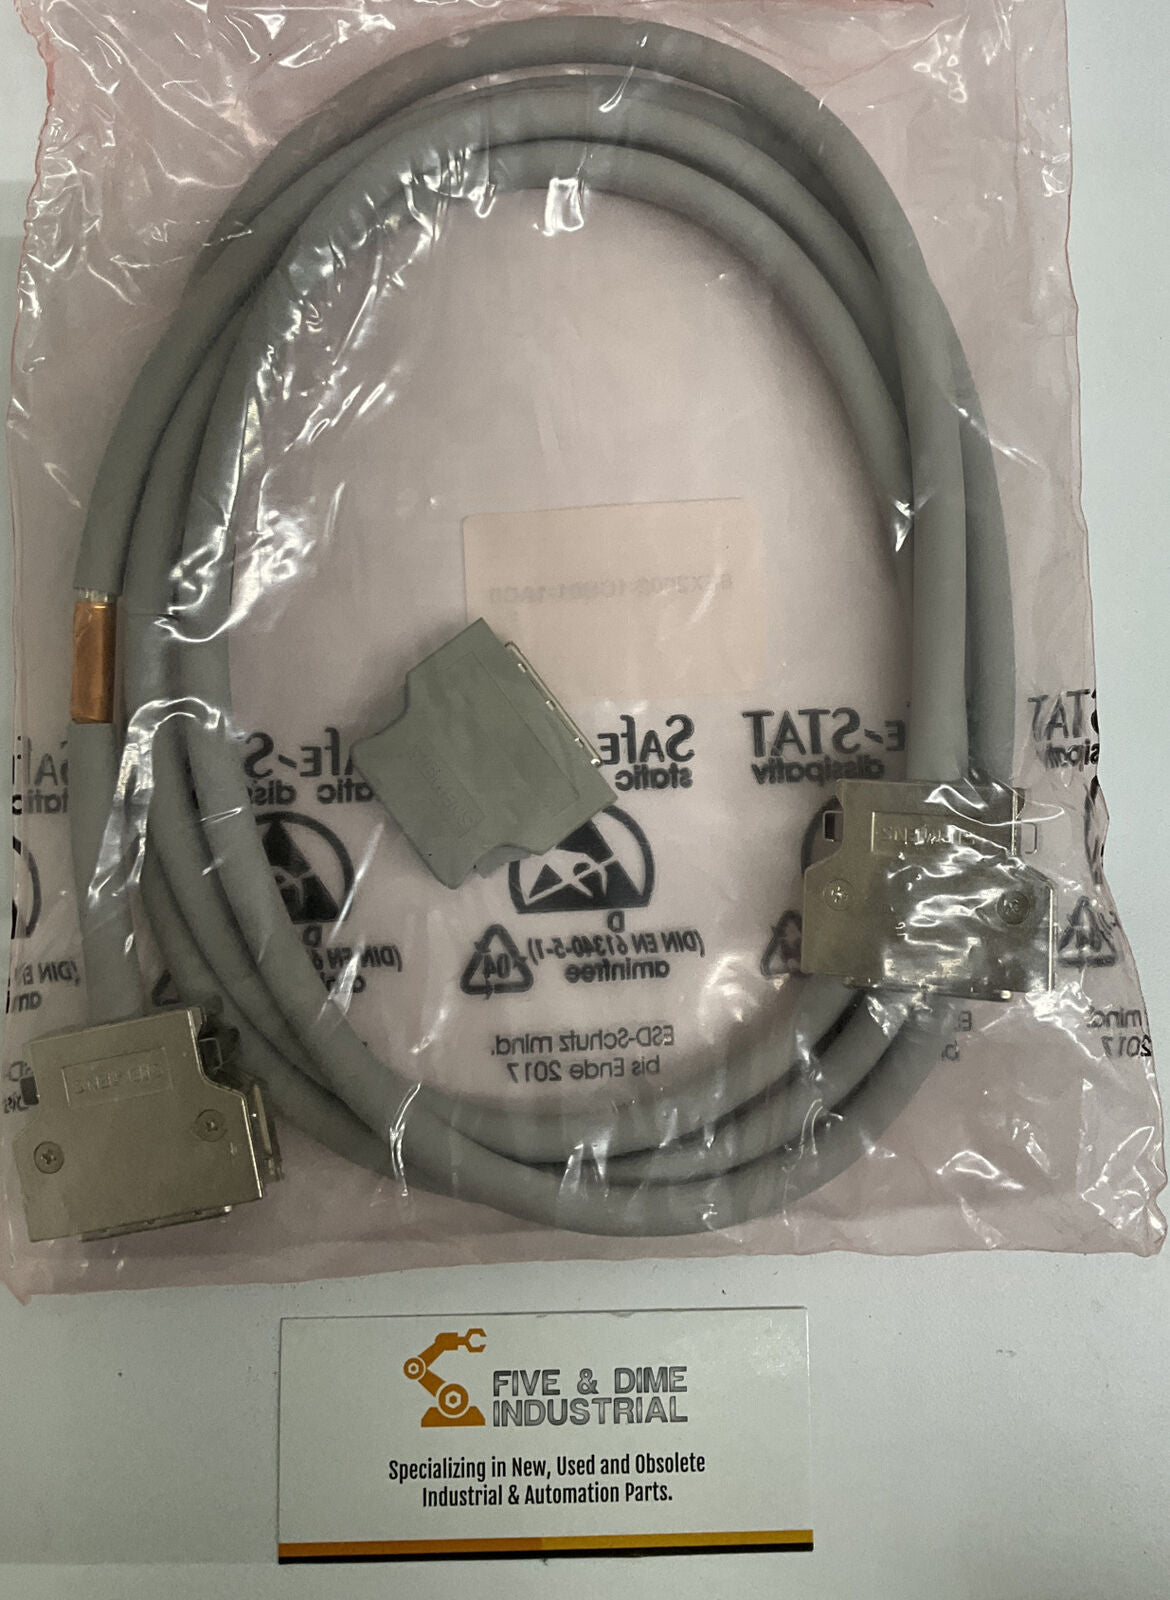 Siemens 6FX2002-1CB01 - 1AC0 Preassembled Signal Cable 2 Meter (BL208)